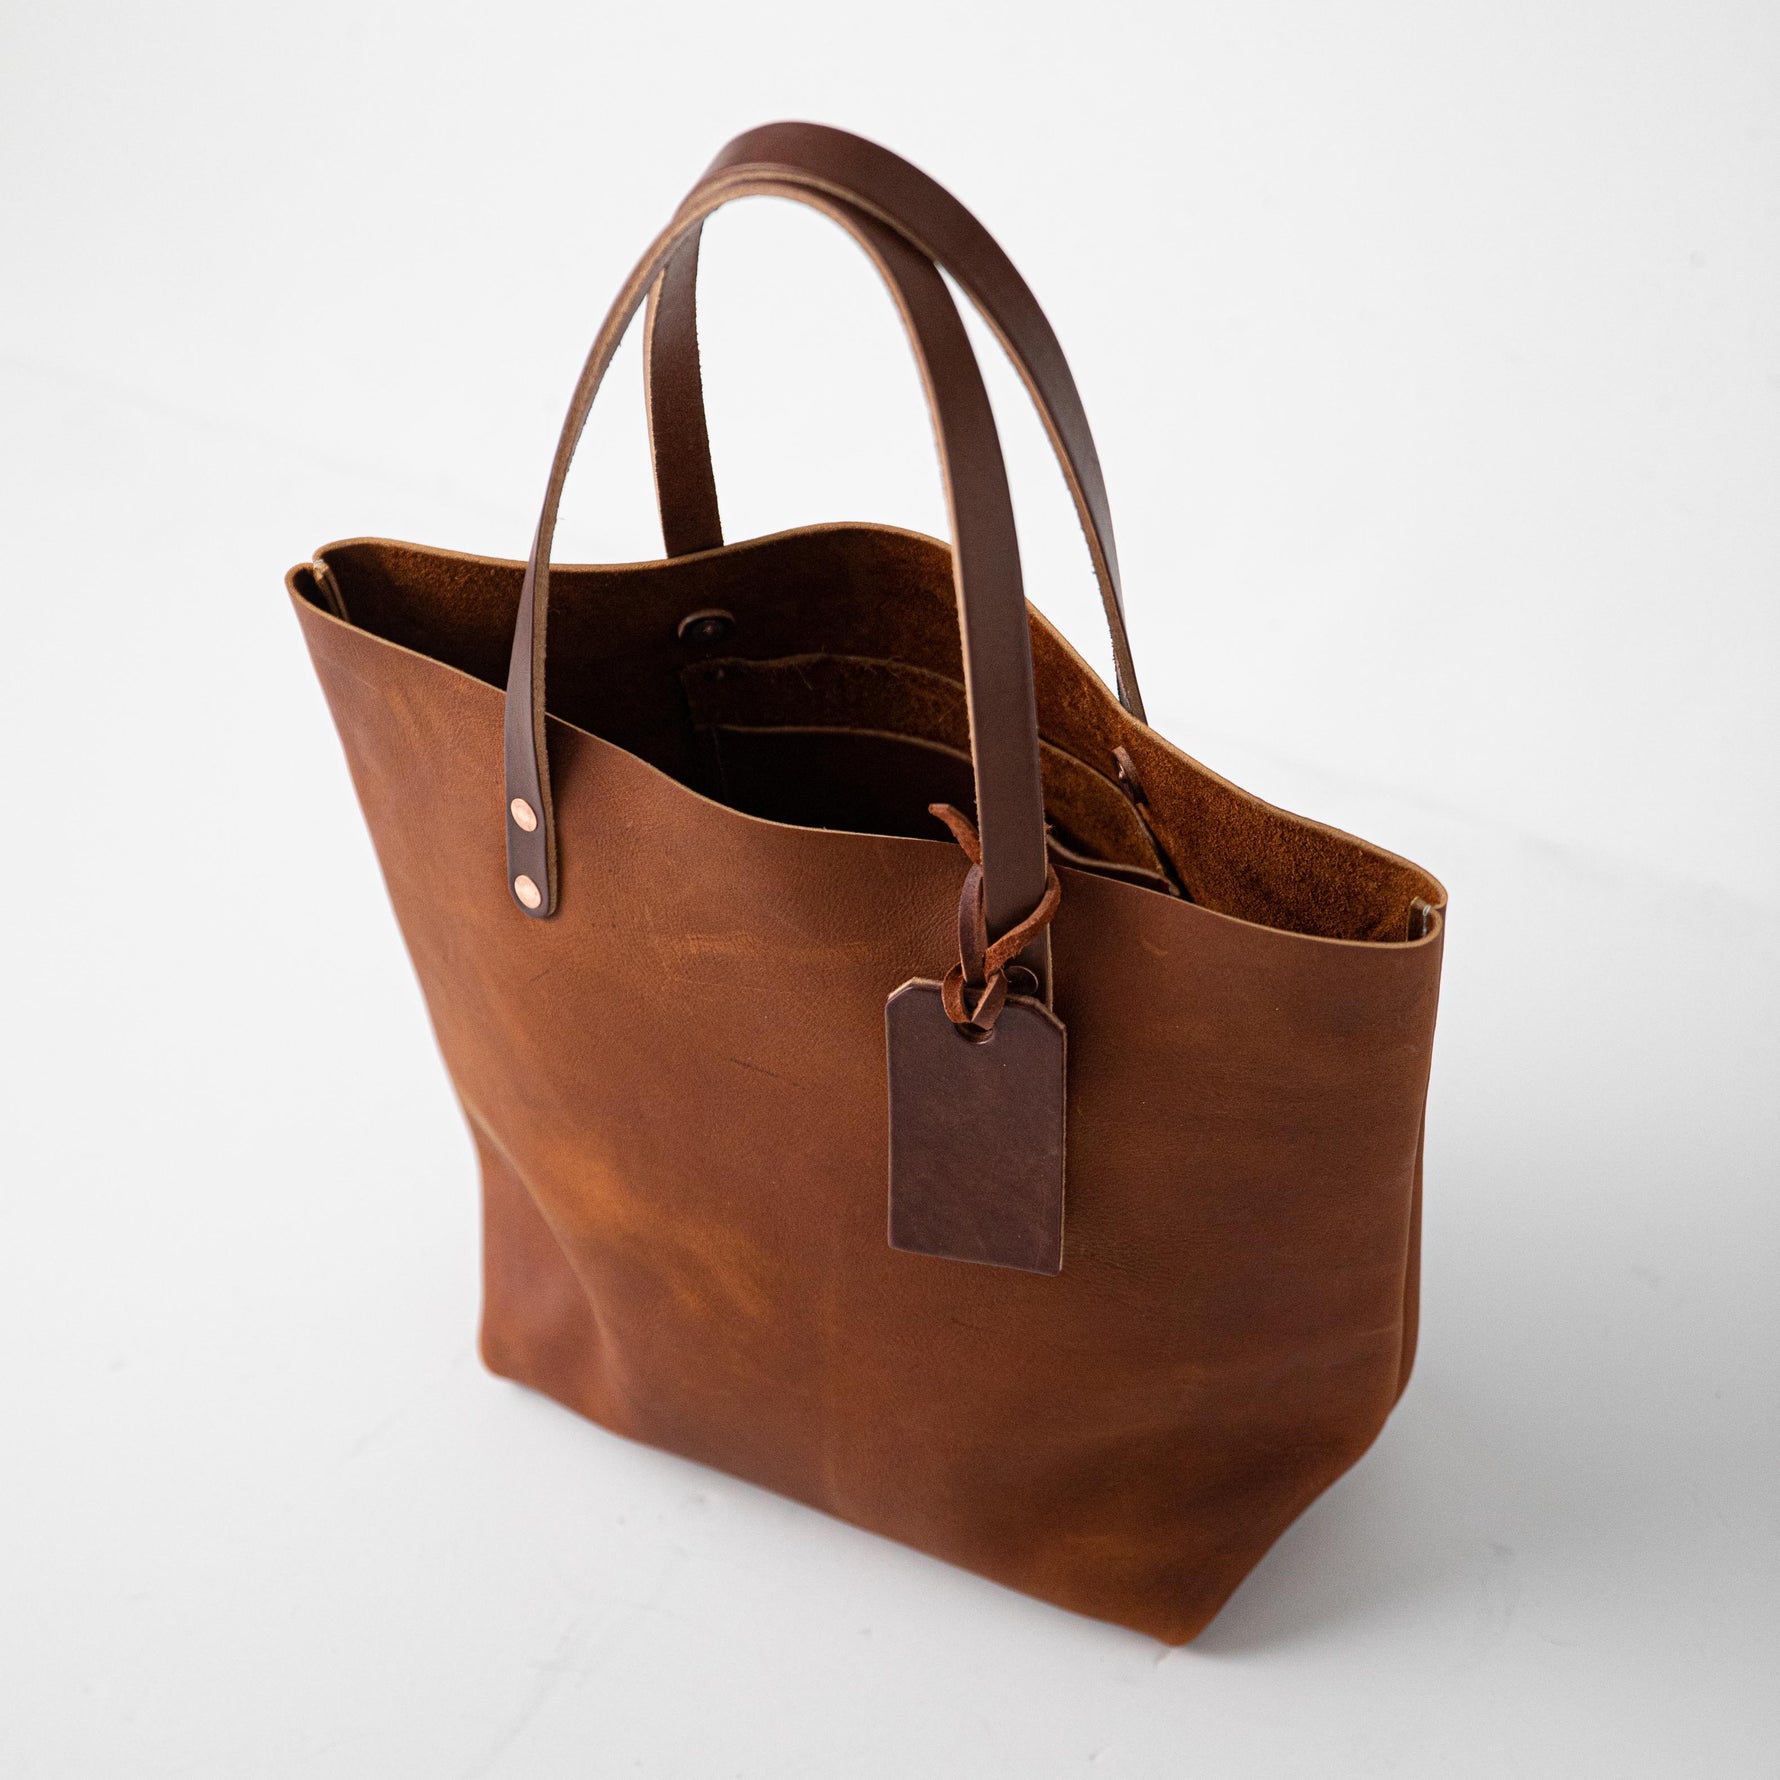 Cypress Tote | Leather Tote bag made in the USA by KMM & Co.